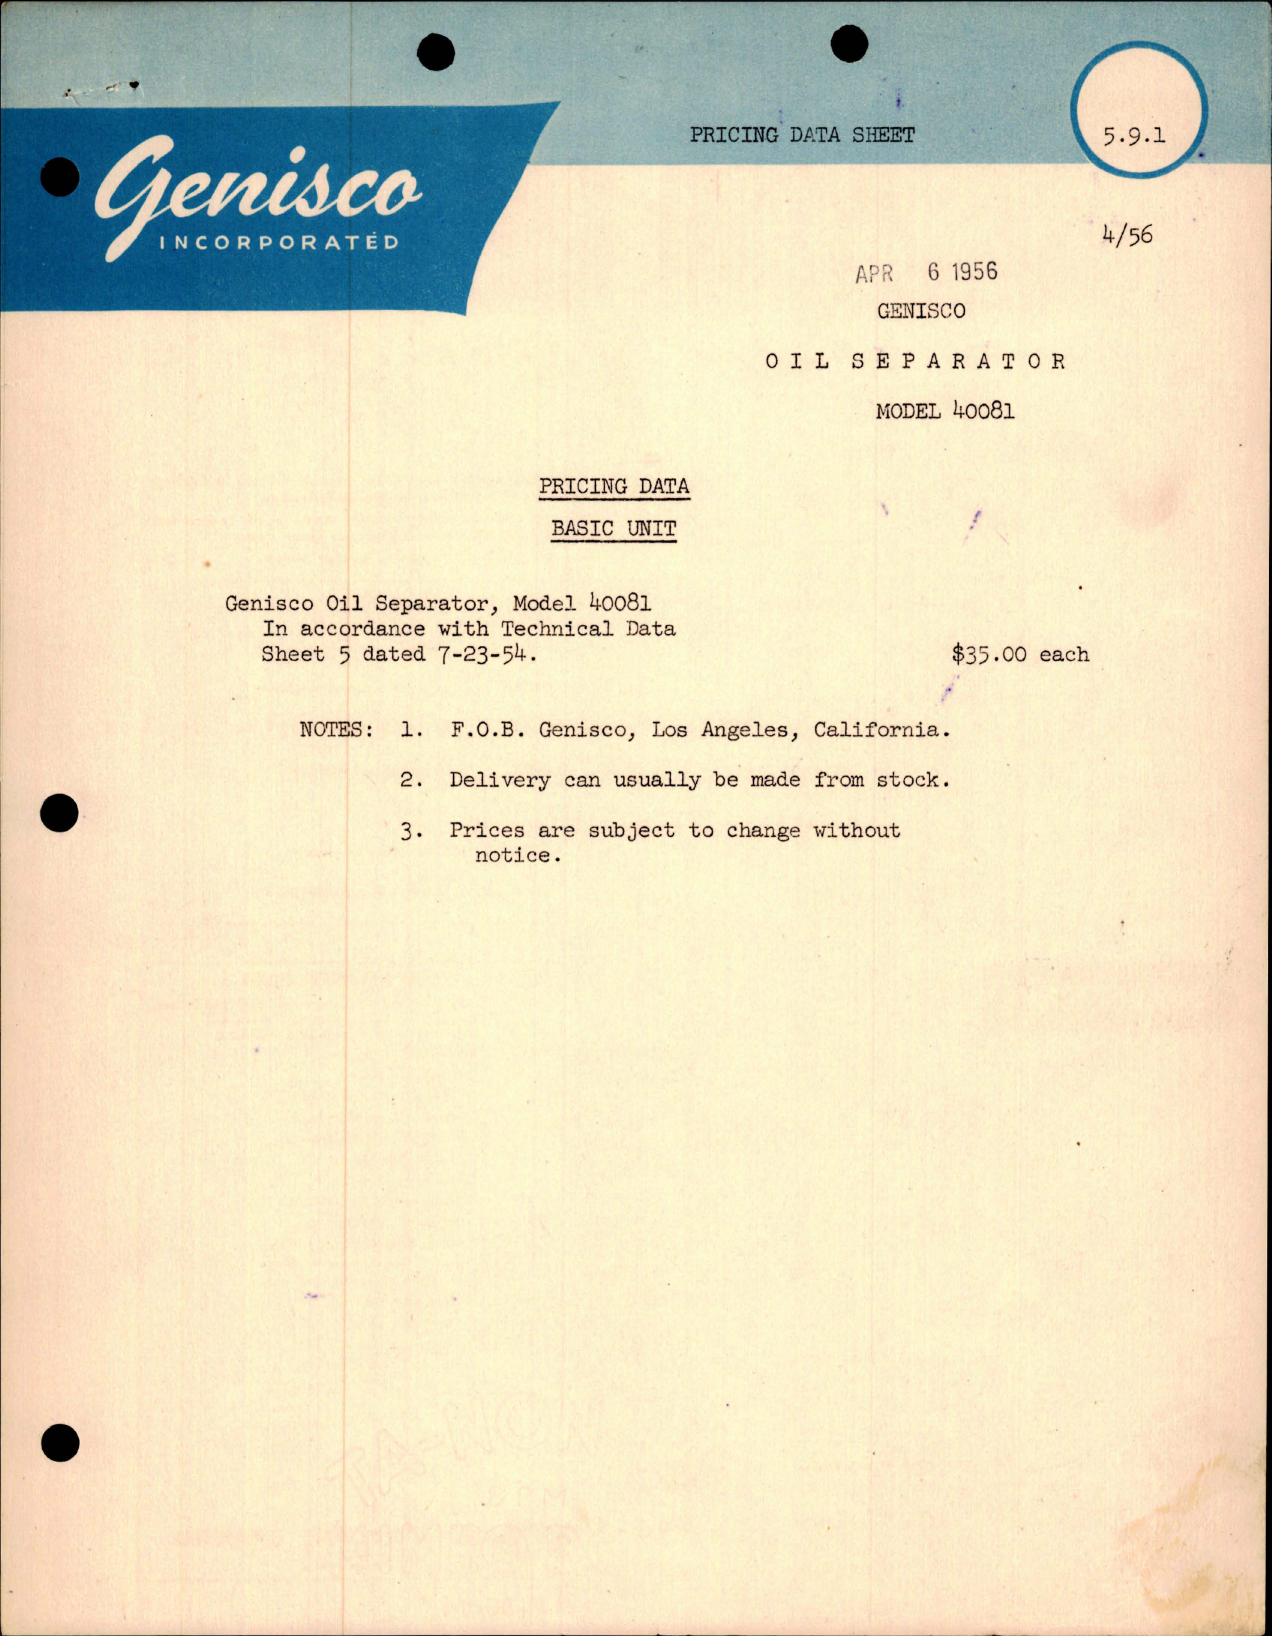 Sample page 1 from AirCorps Library document: Pricing Data Sheet for Oil Separator - Model 40081 